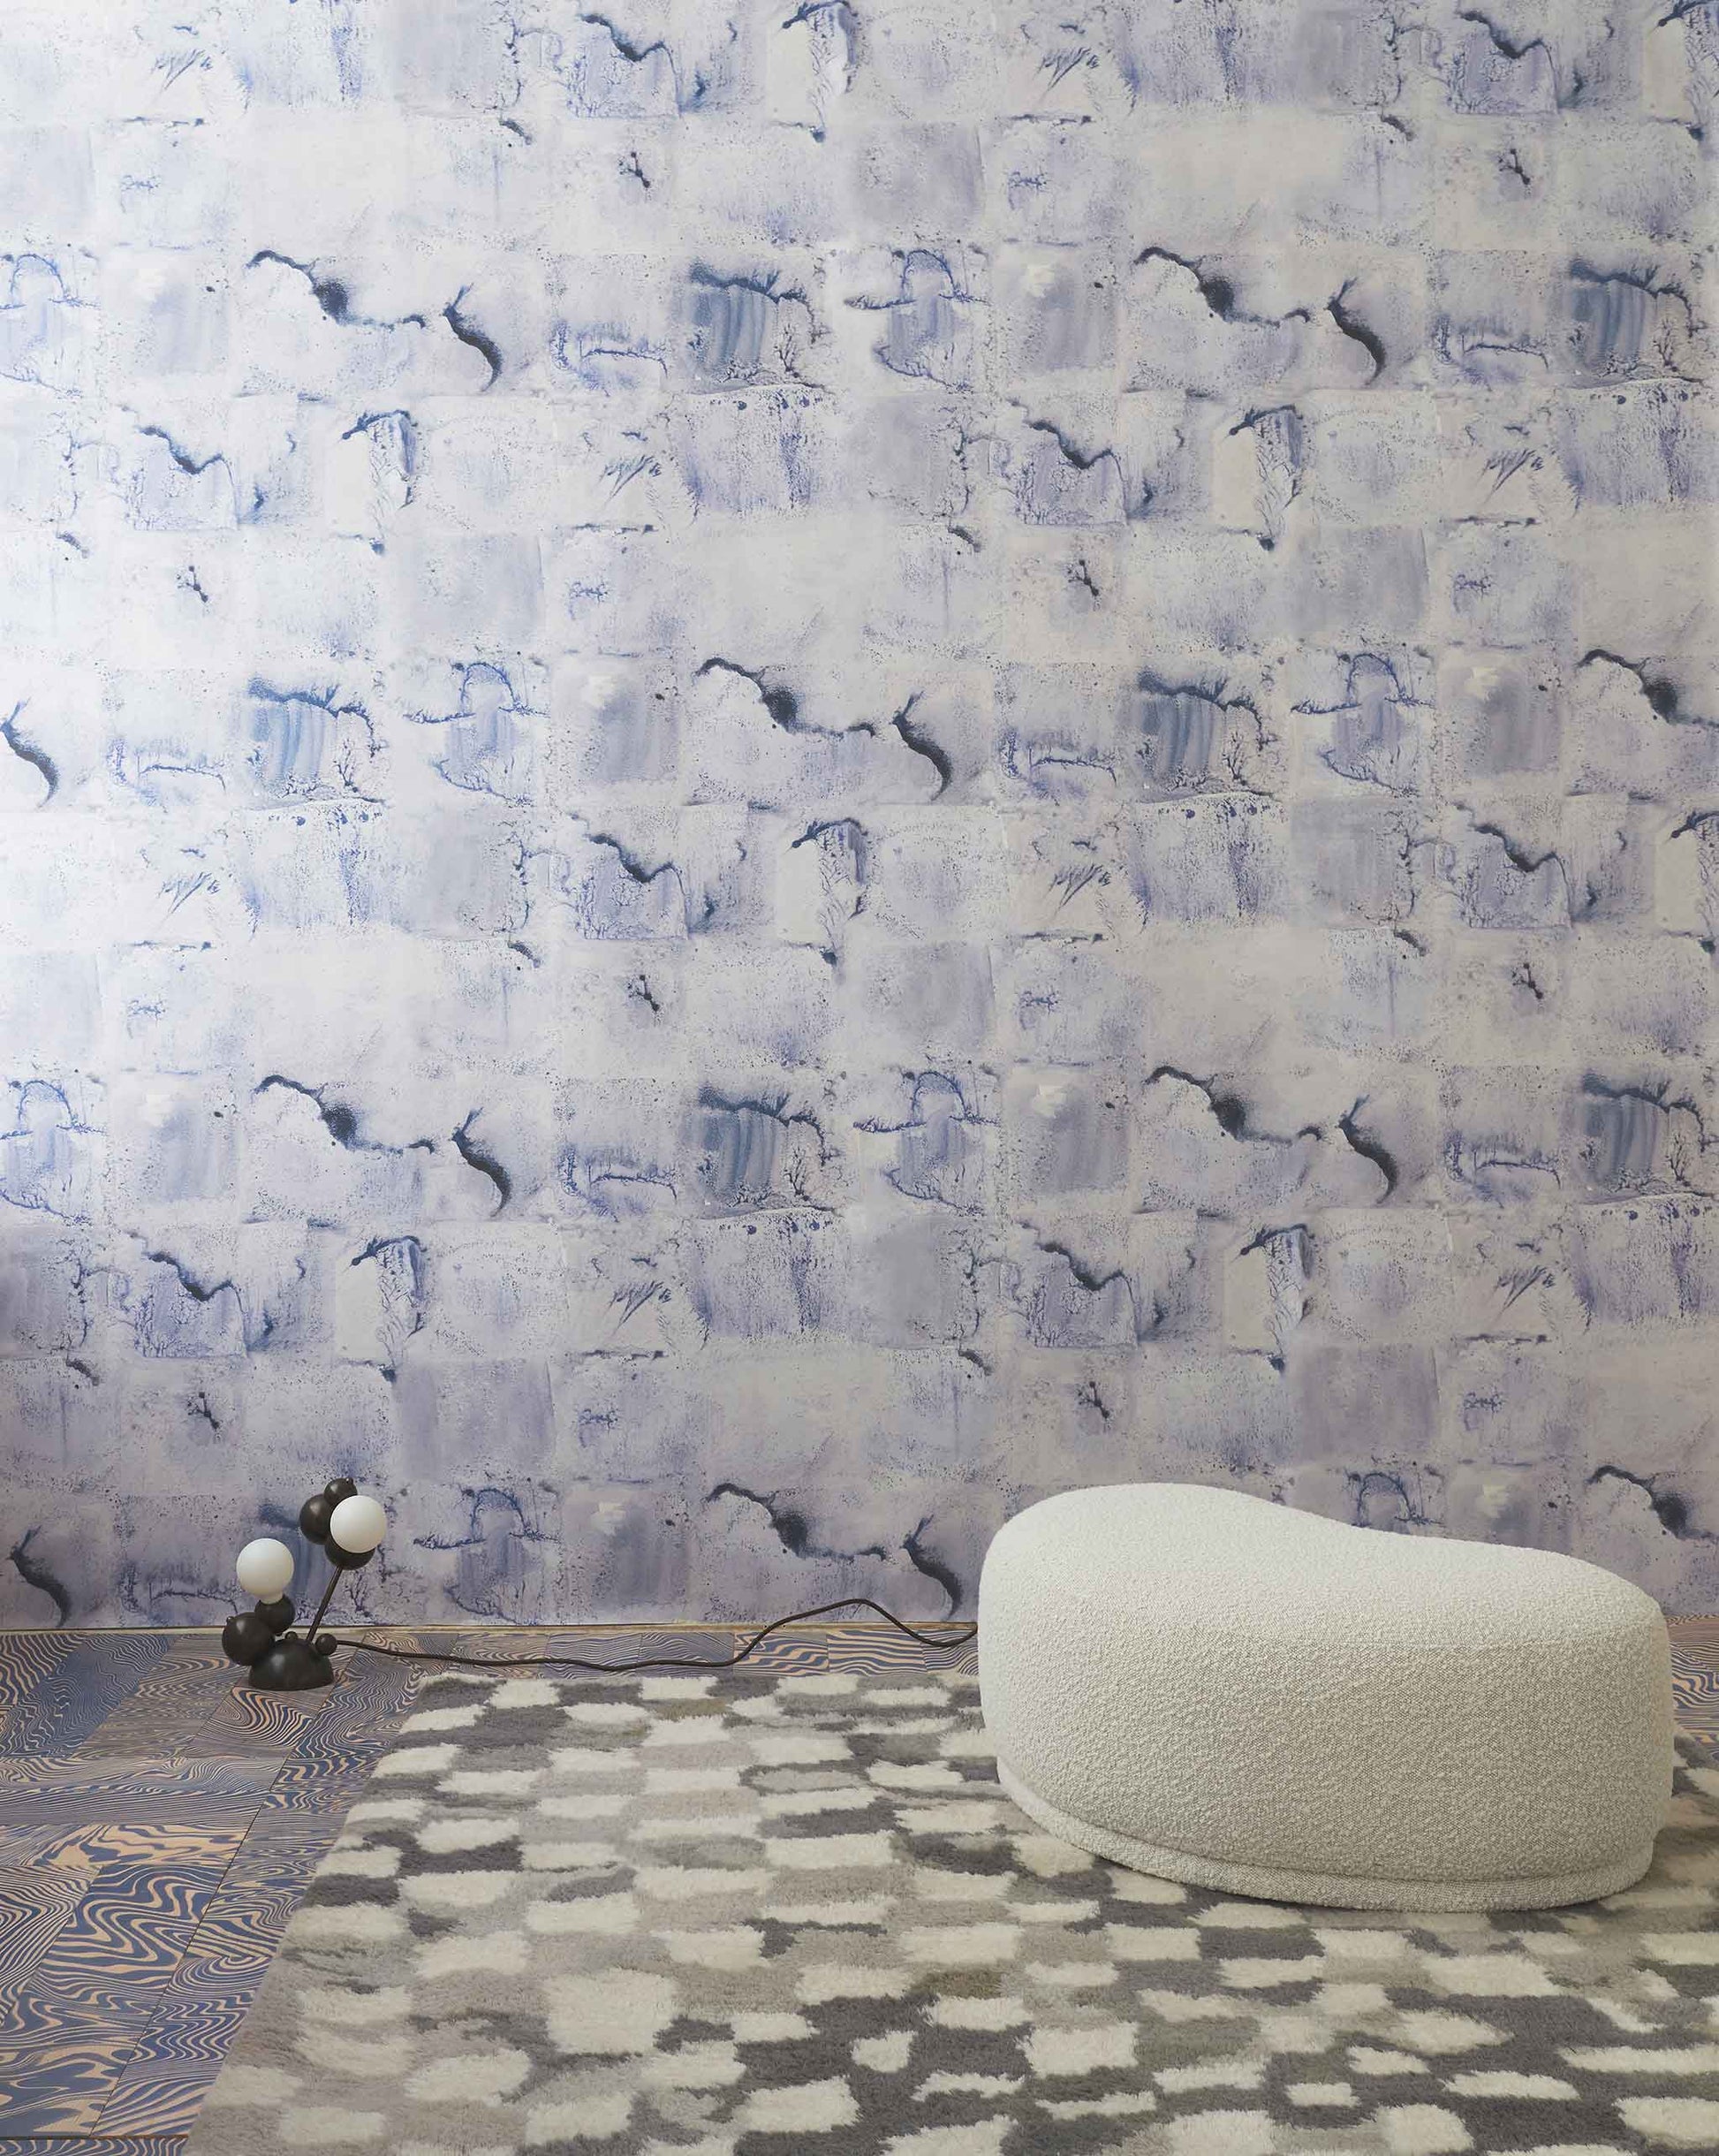 A room with Melting Checks Wallpaper||Ocean, a playful ocean colorway and textured modern spirit.